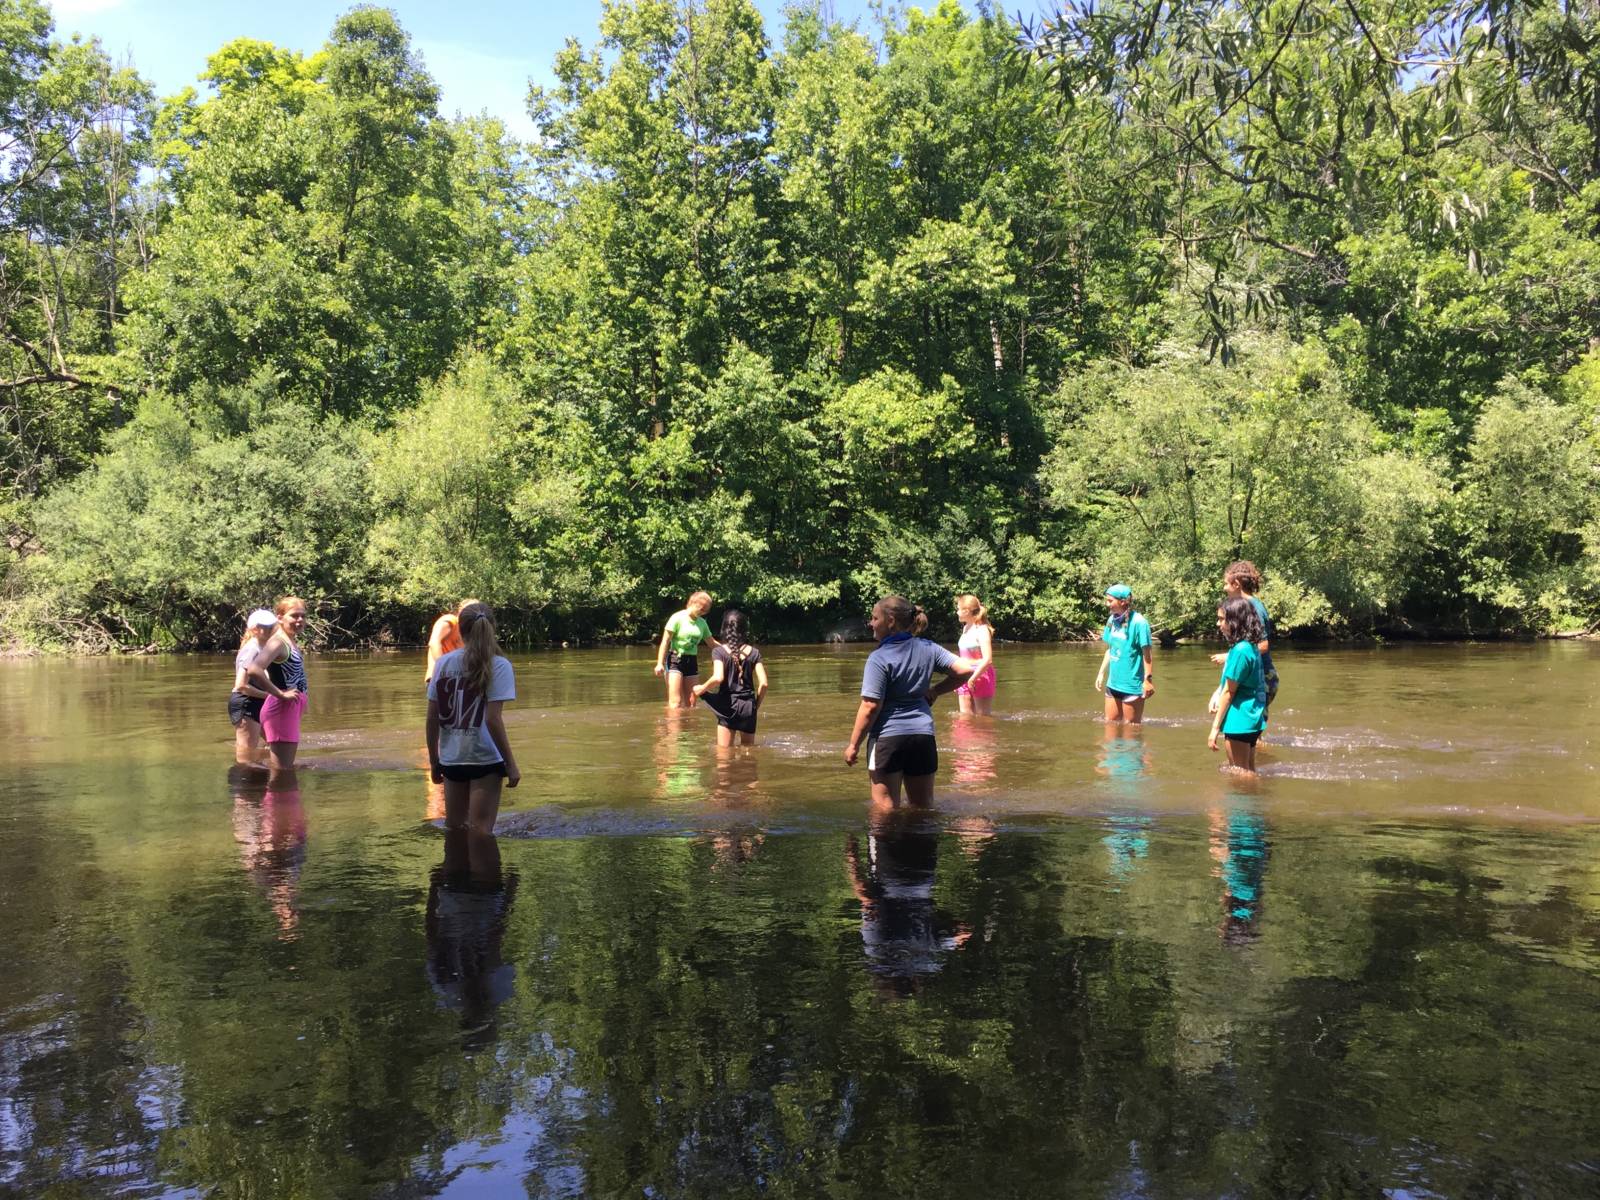 A group of kids stand socially distanced in a shallow river